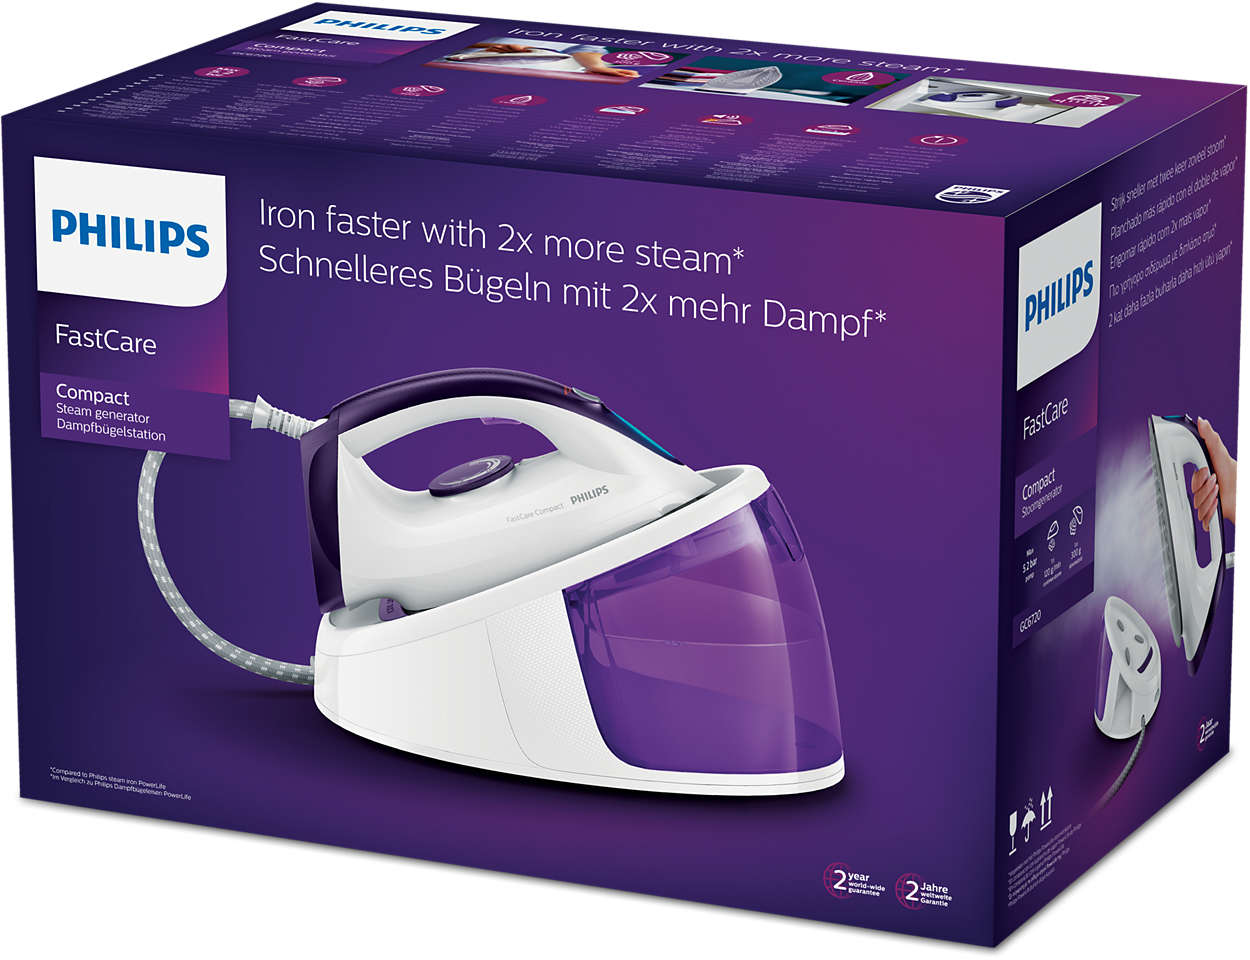 FastCare Compact Dampfbügelstation GC6720/30 | Philips